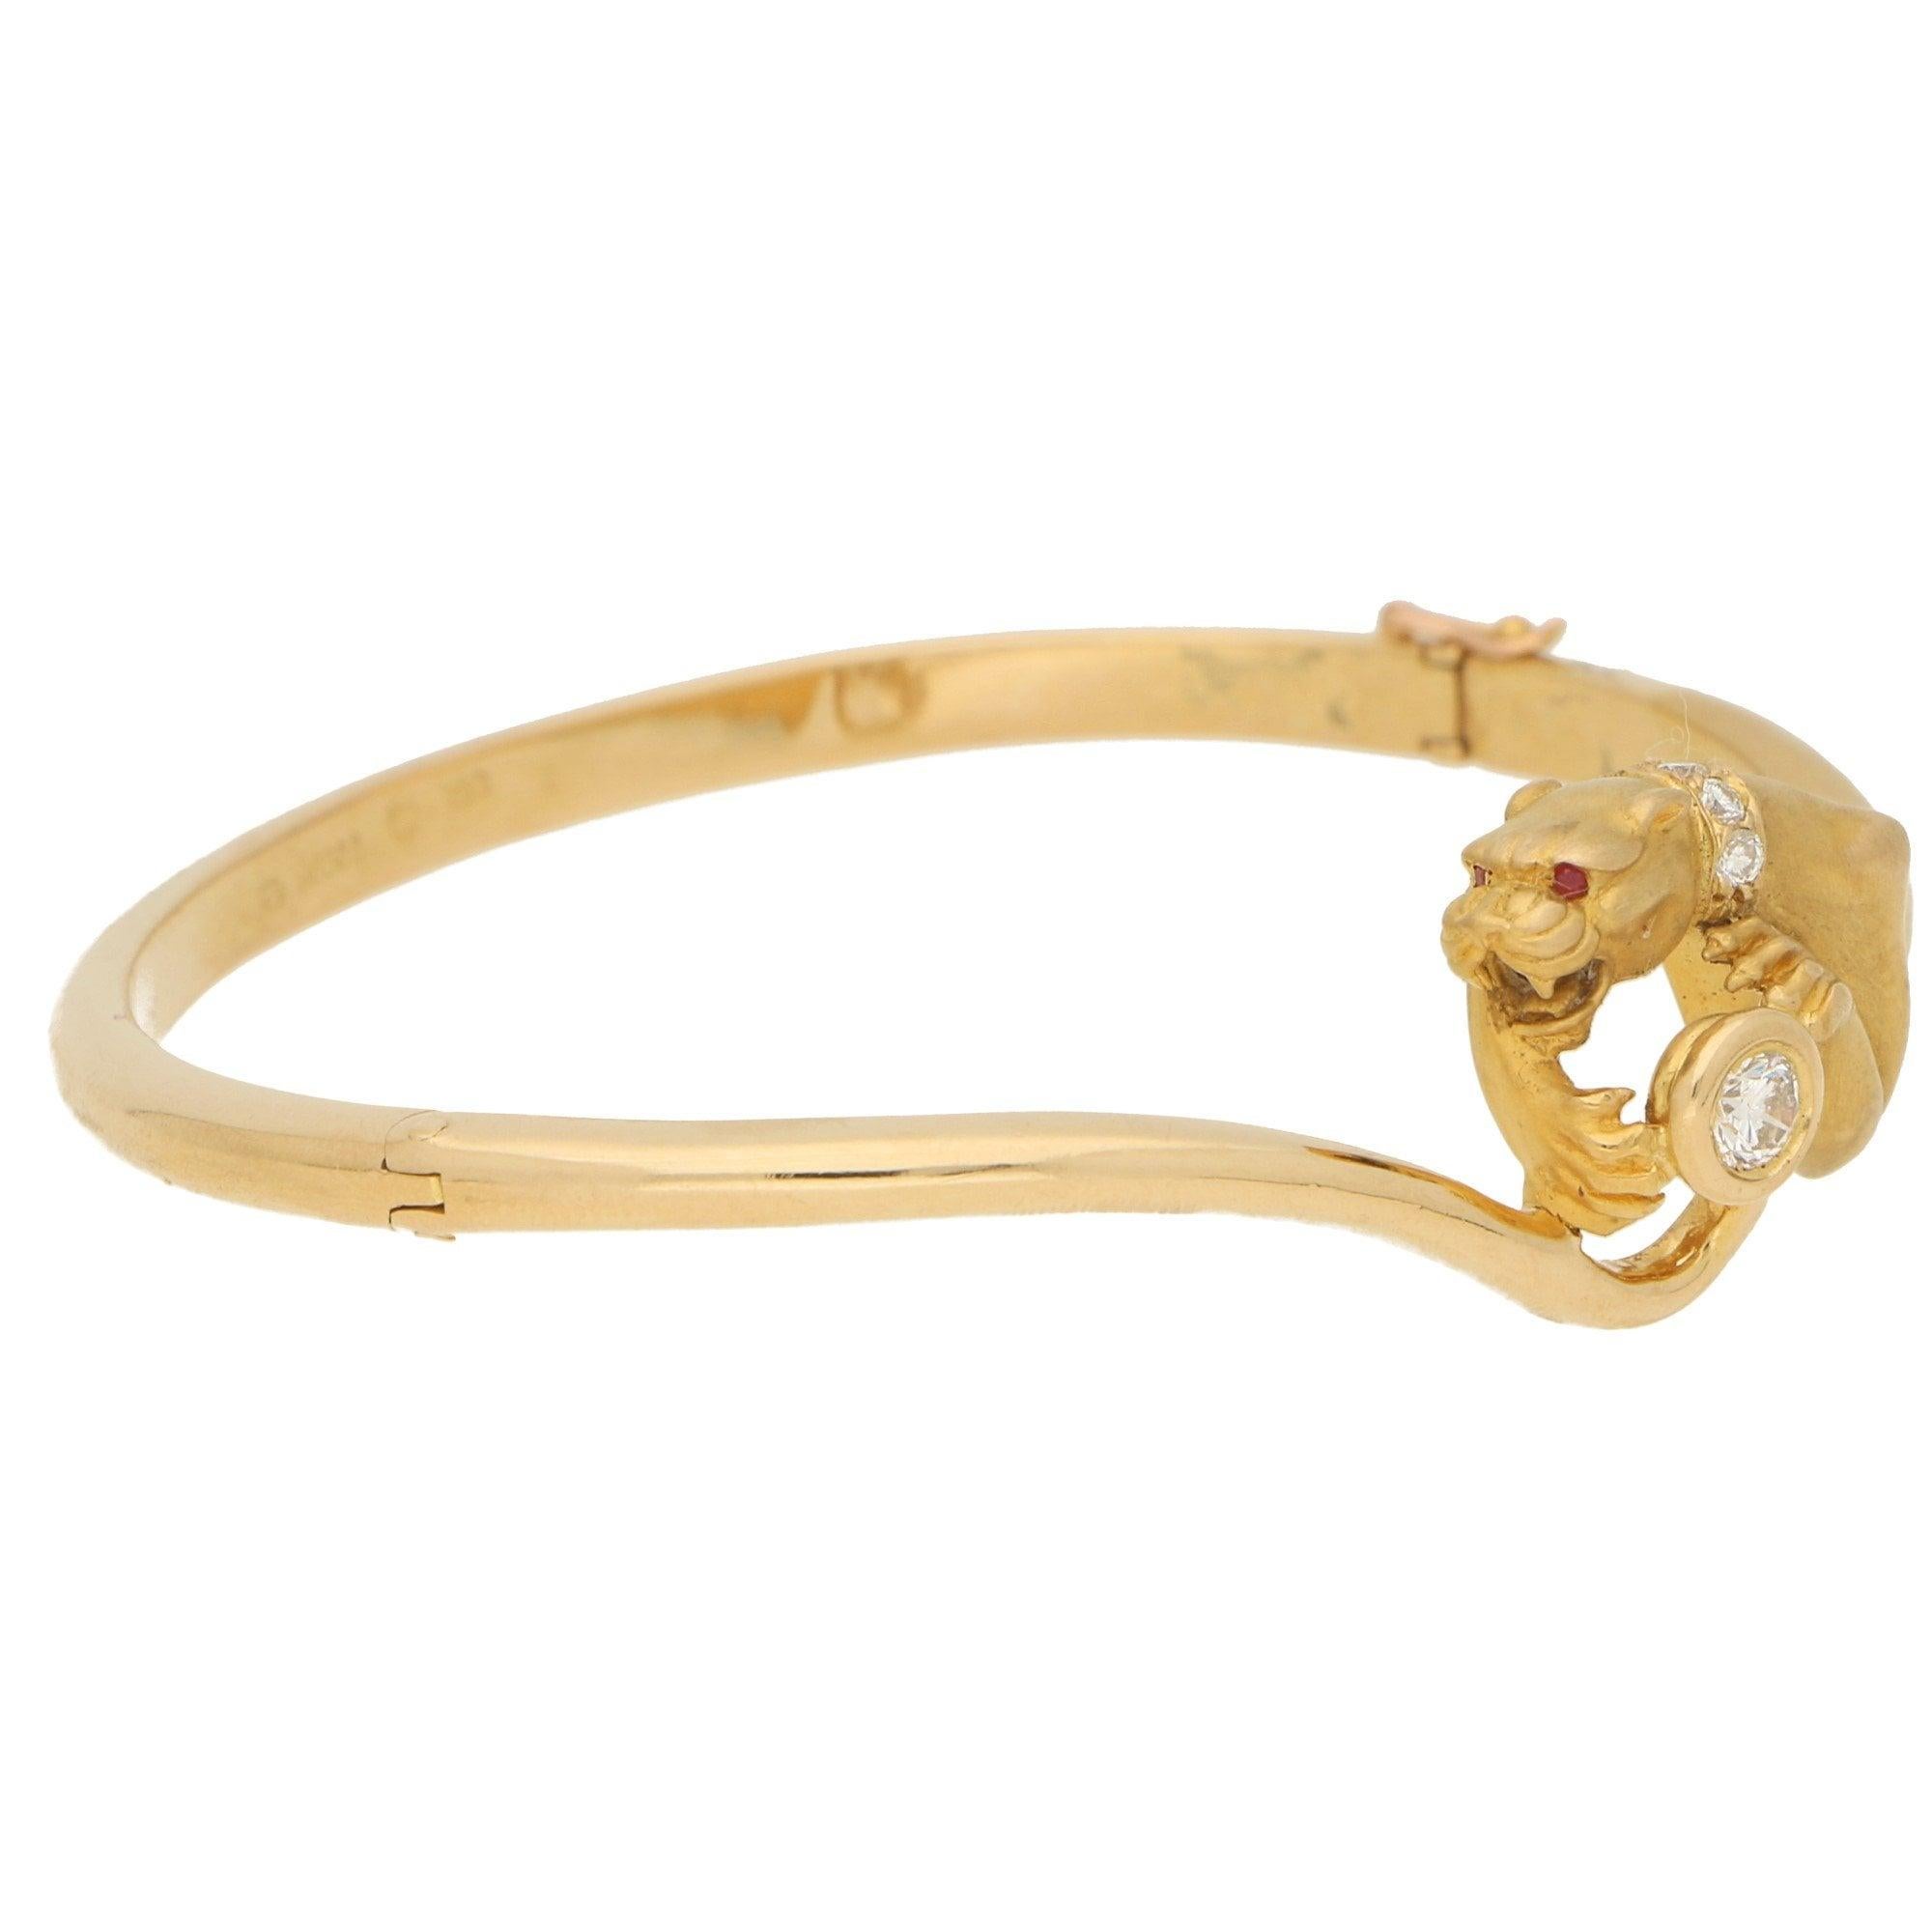 A vintage Carrera y Carrera diamond panther bangle bracelet in 18-karat yellow gold, circa 1980. This piece is depicted as a panther pouching on a collet-set round brilliant-cut diamond, further accented with a round brilliant-cut diamond collar and